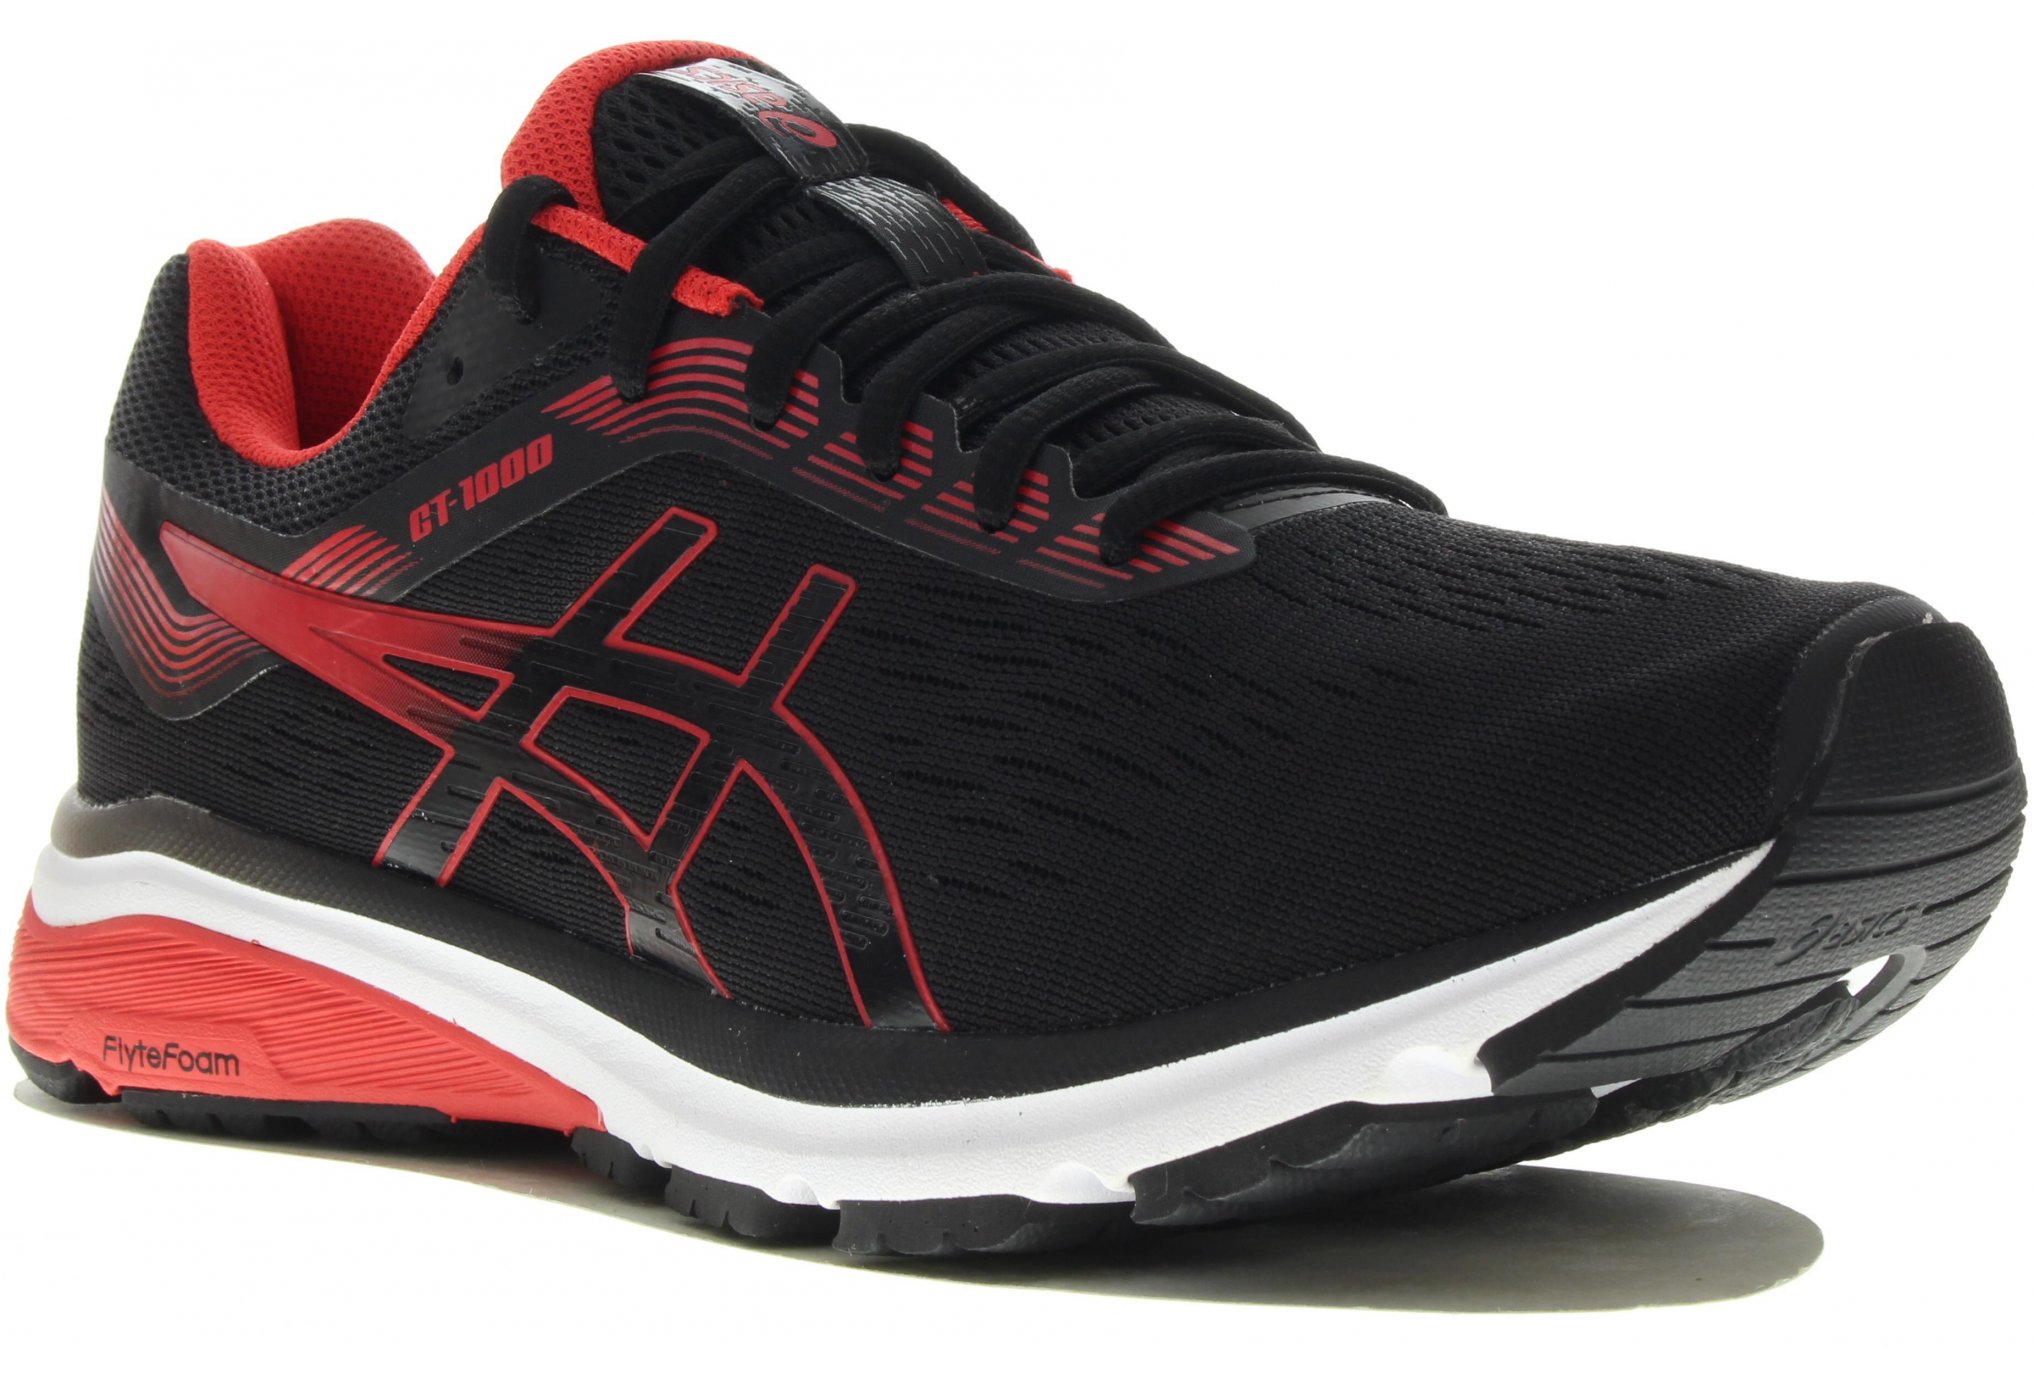 Asics Gt-1000 7 m dittique chaussures homme